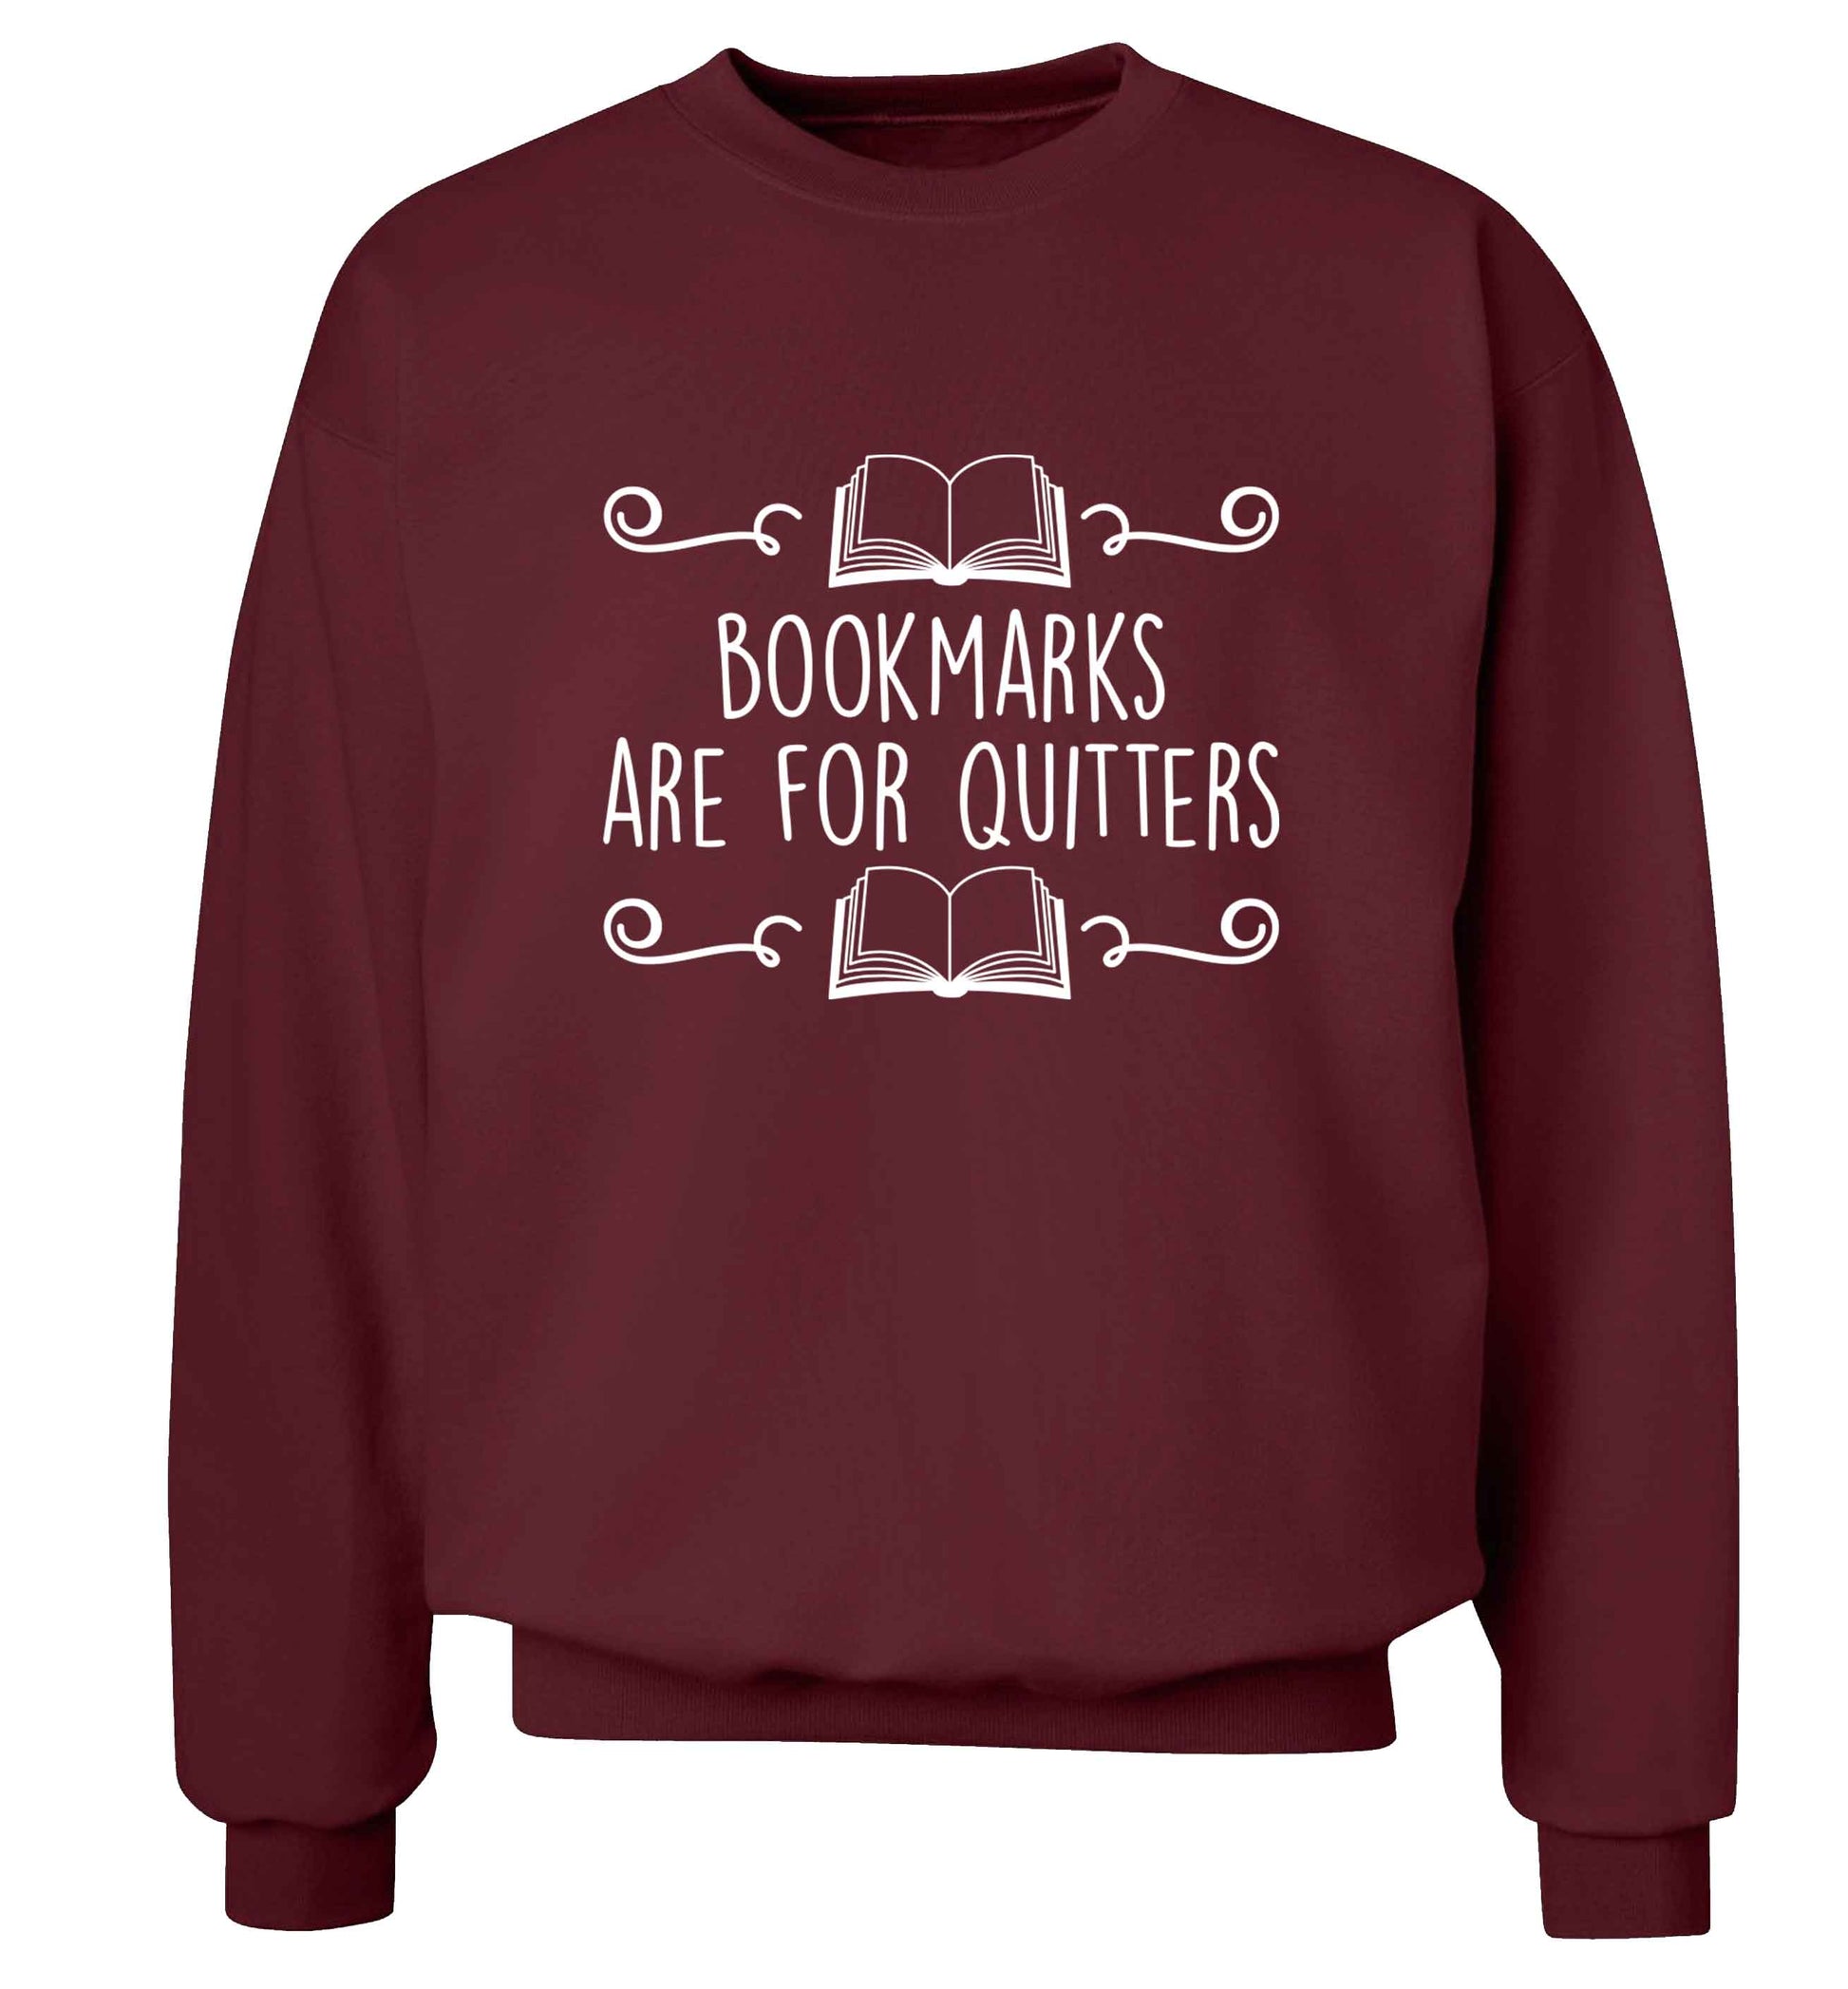 Bookmarks are for quitters adult's unisex maroon sweater 2XL